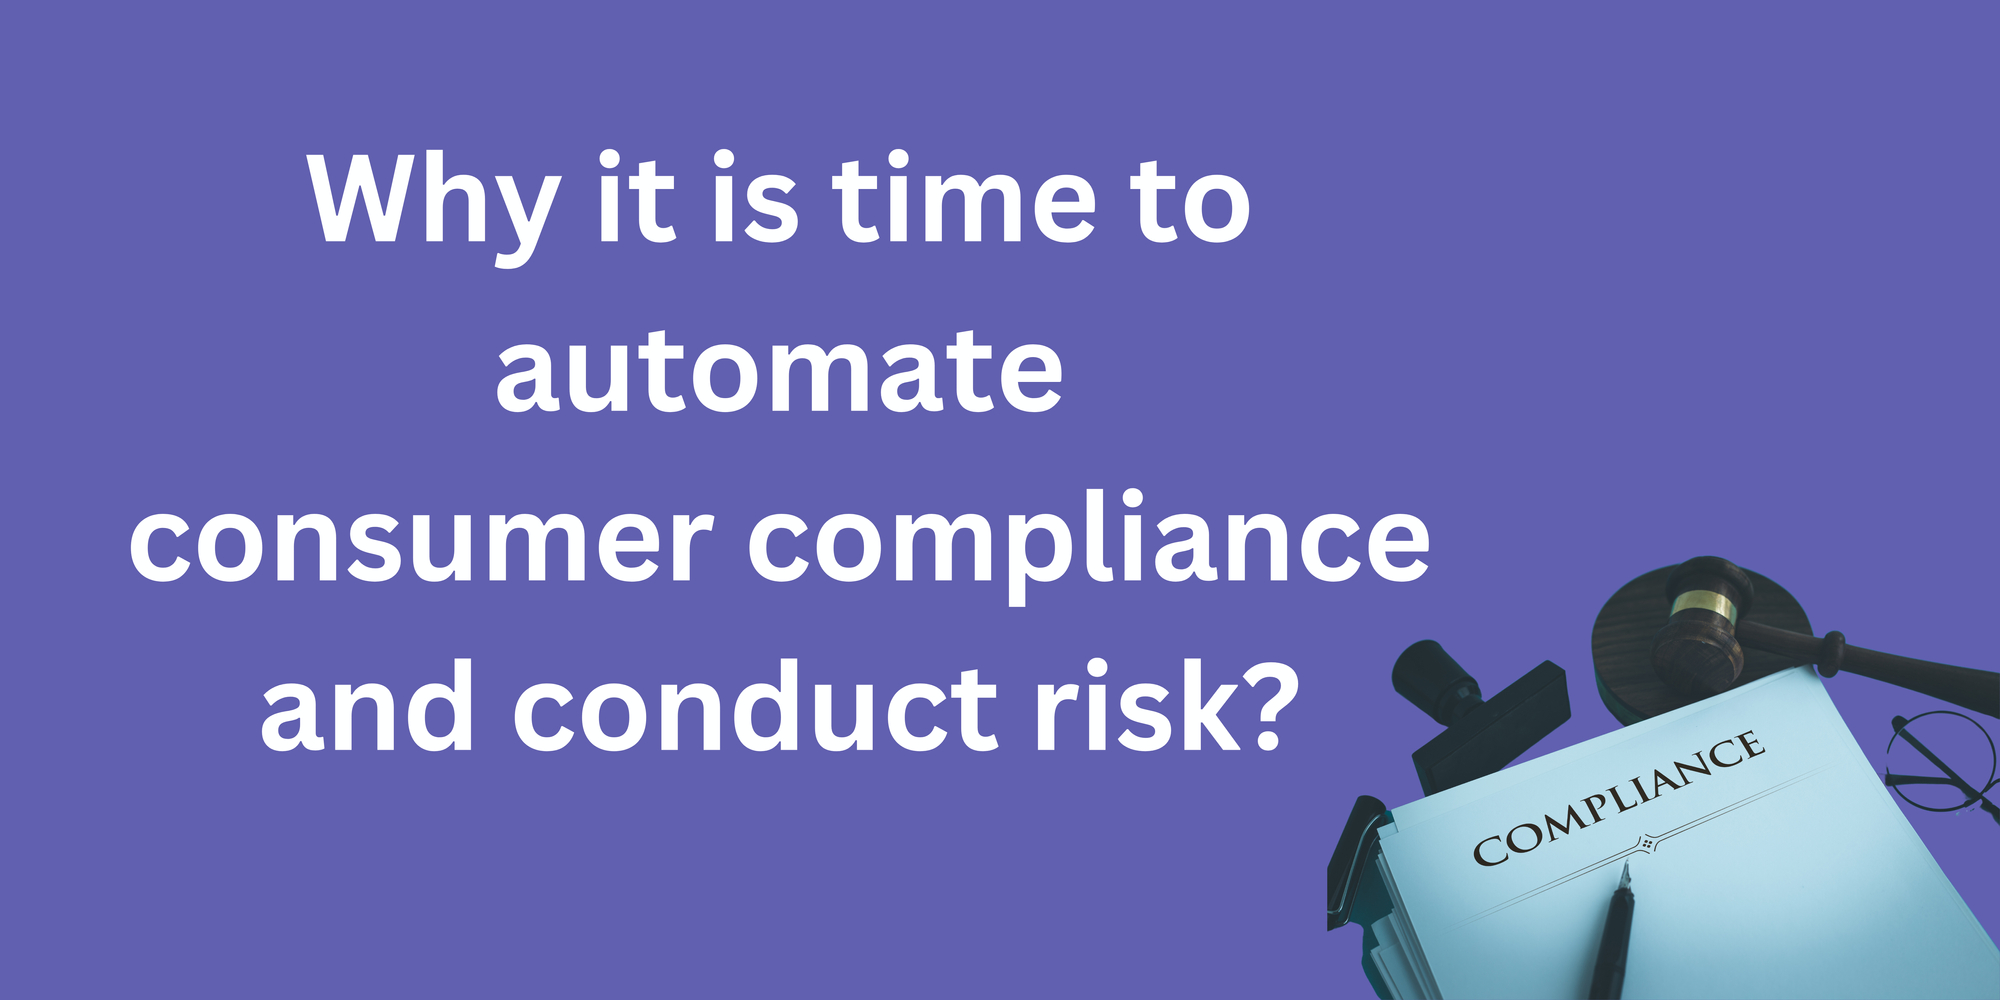 Why it is time to automate consumer compliance and conduct risk